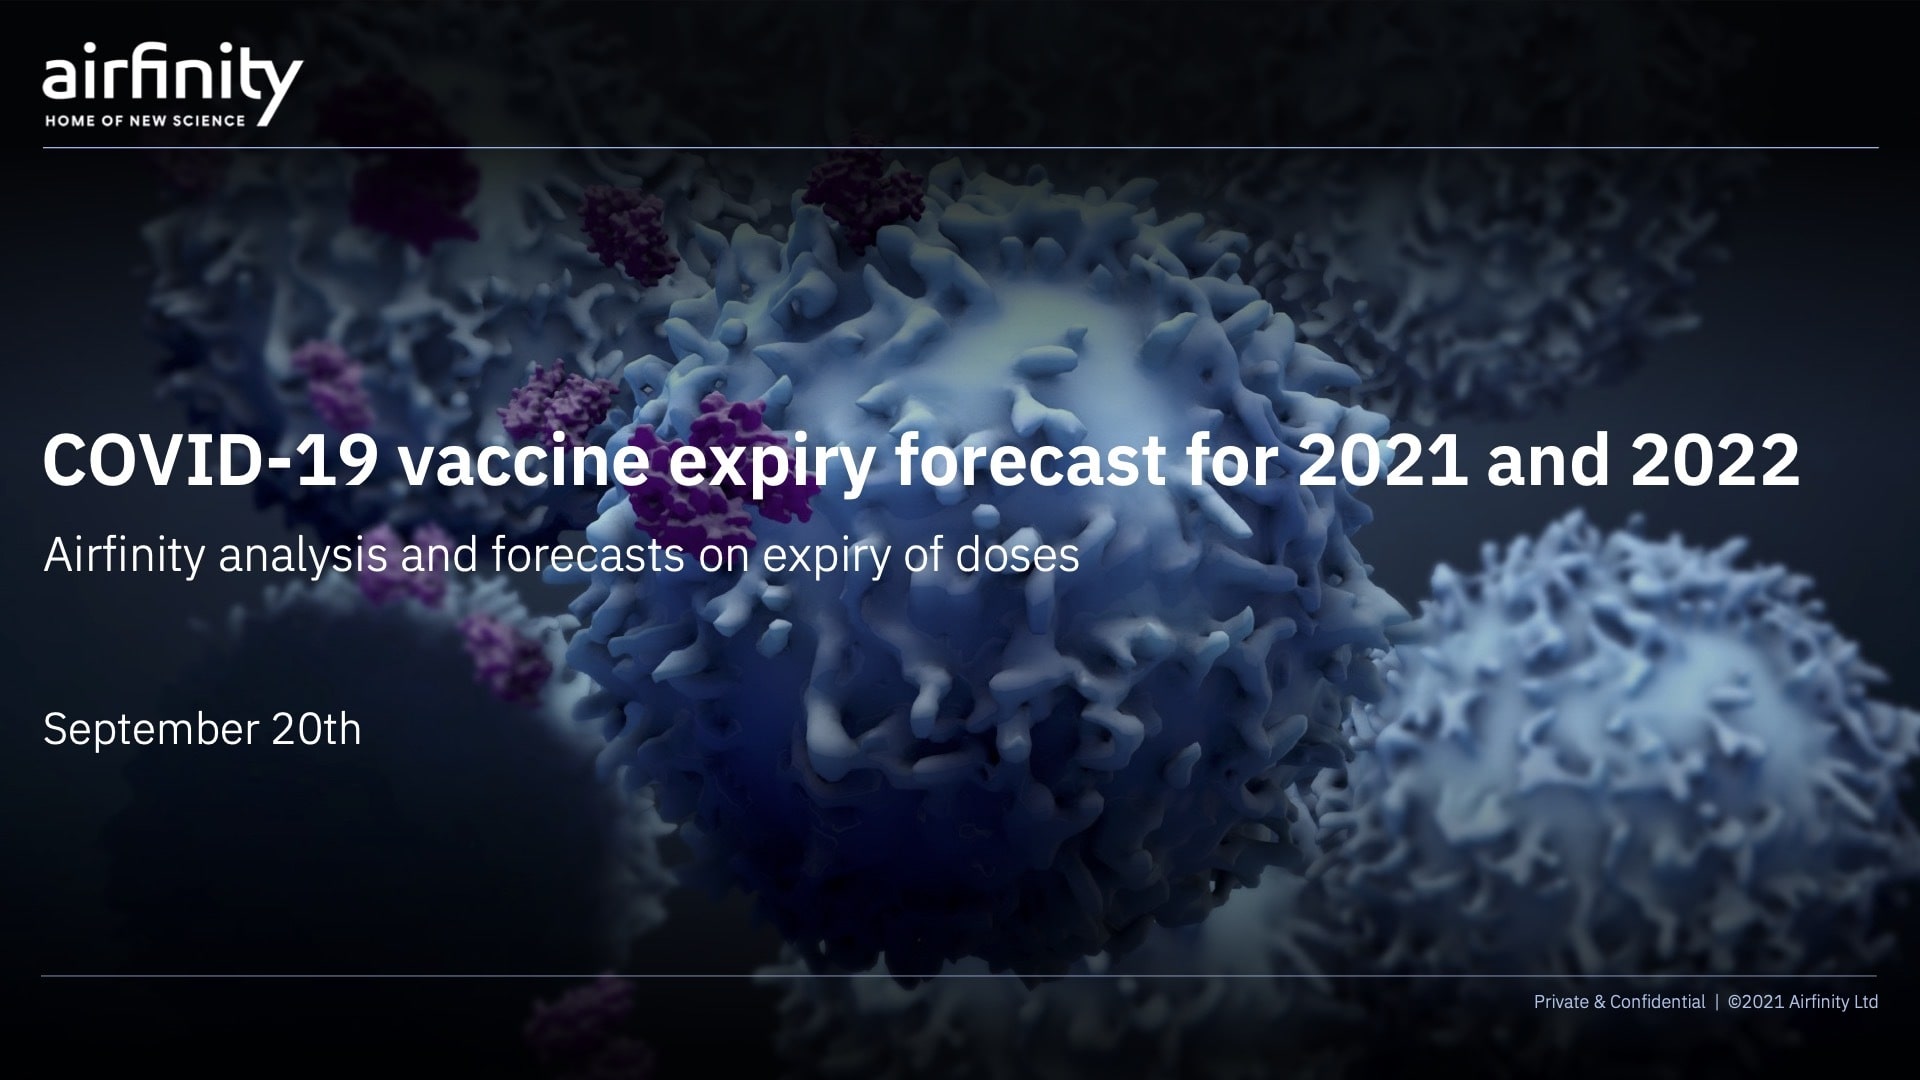 COVID-19 Vaccine Expiry Forecast for 2021 and 2022